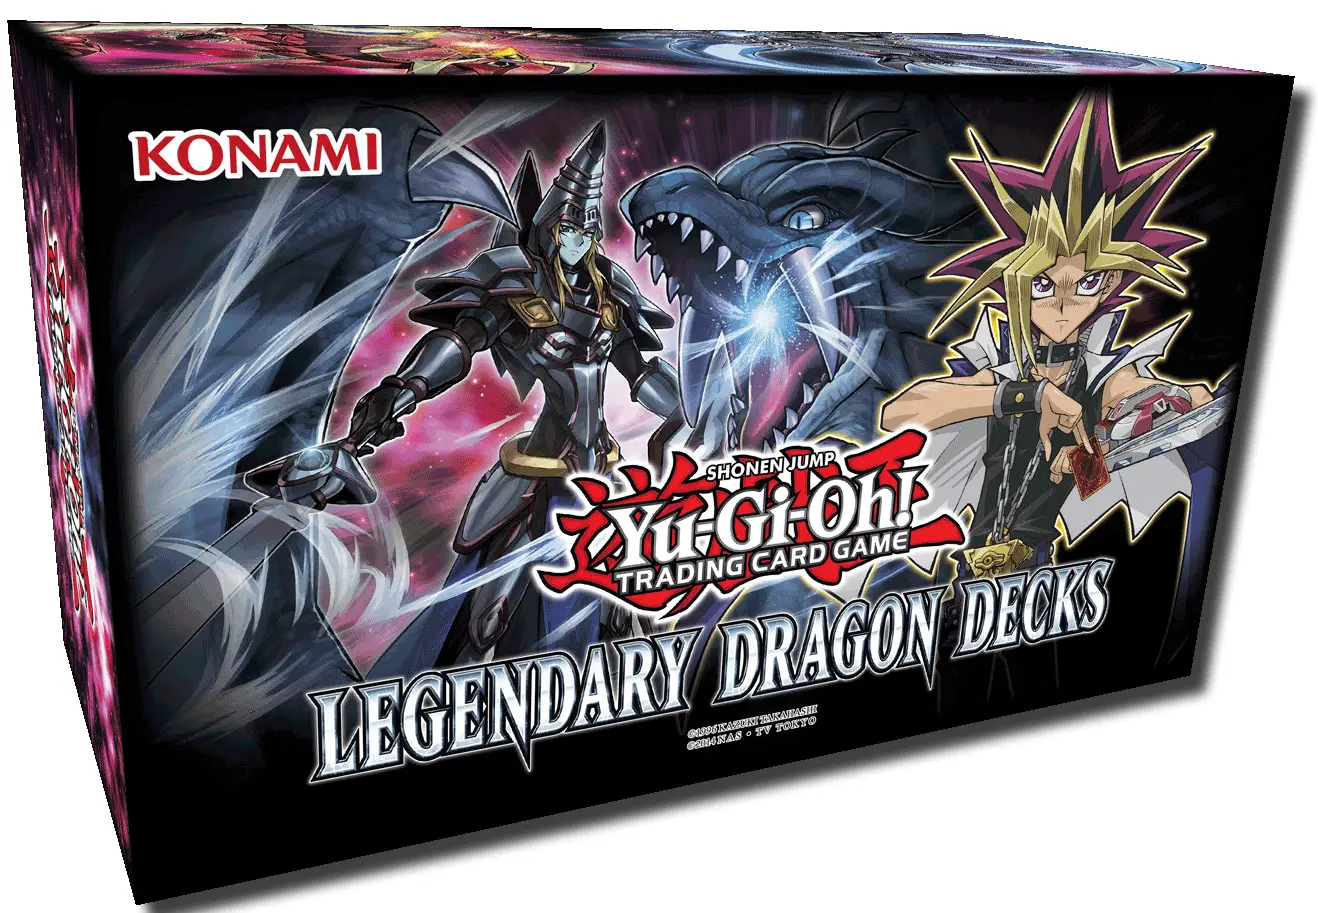 New in October from Yu-Gi-Oh! TRADING CARD GAME! | YuGiOh ...